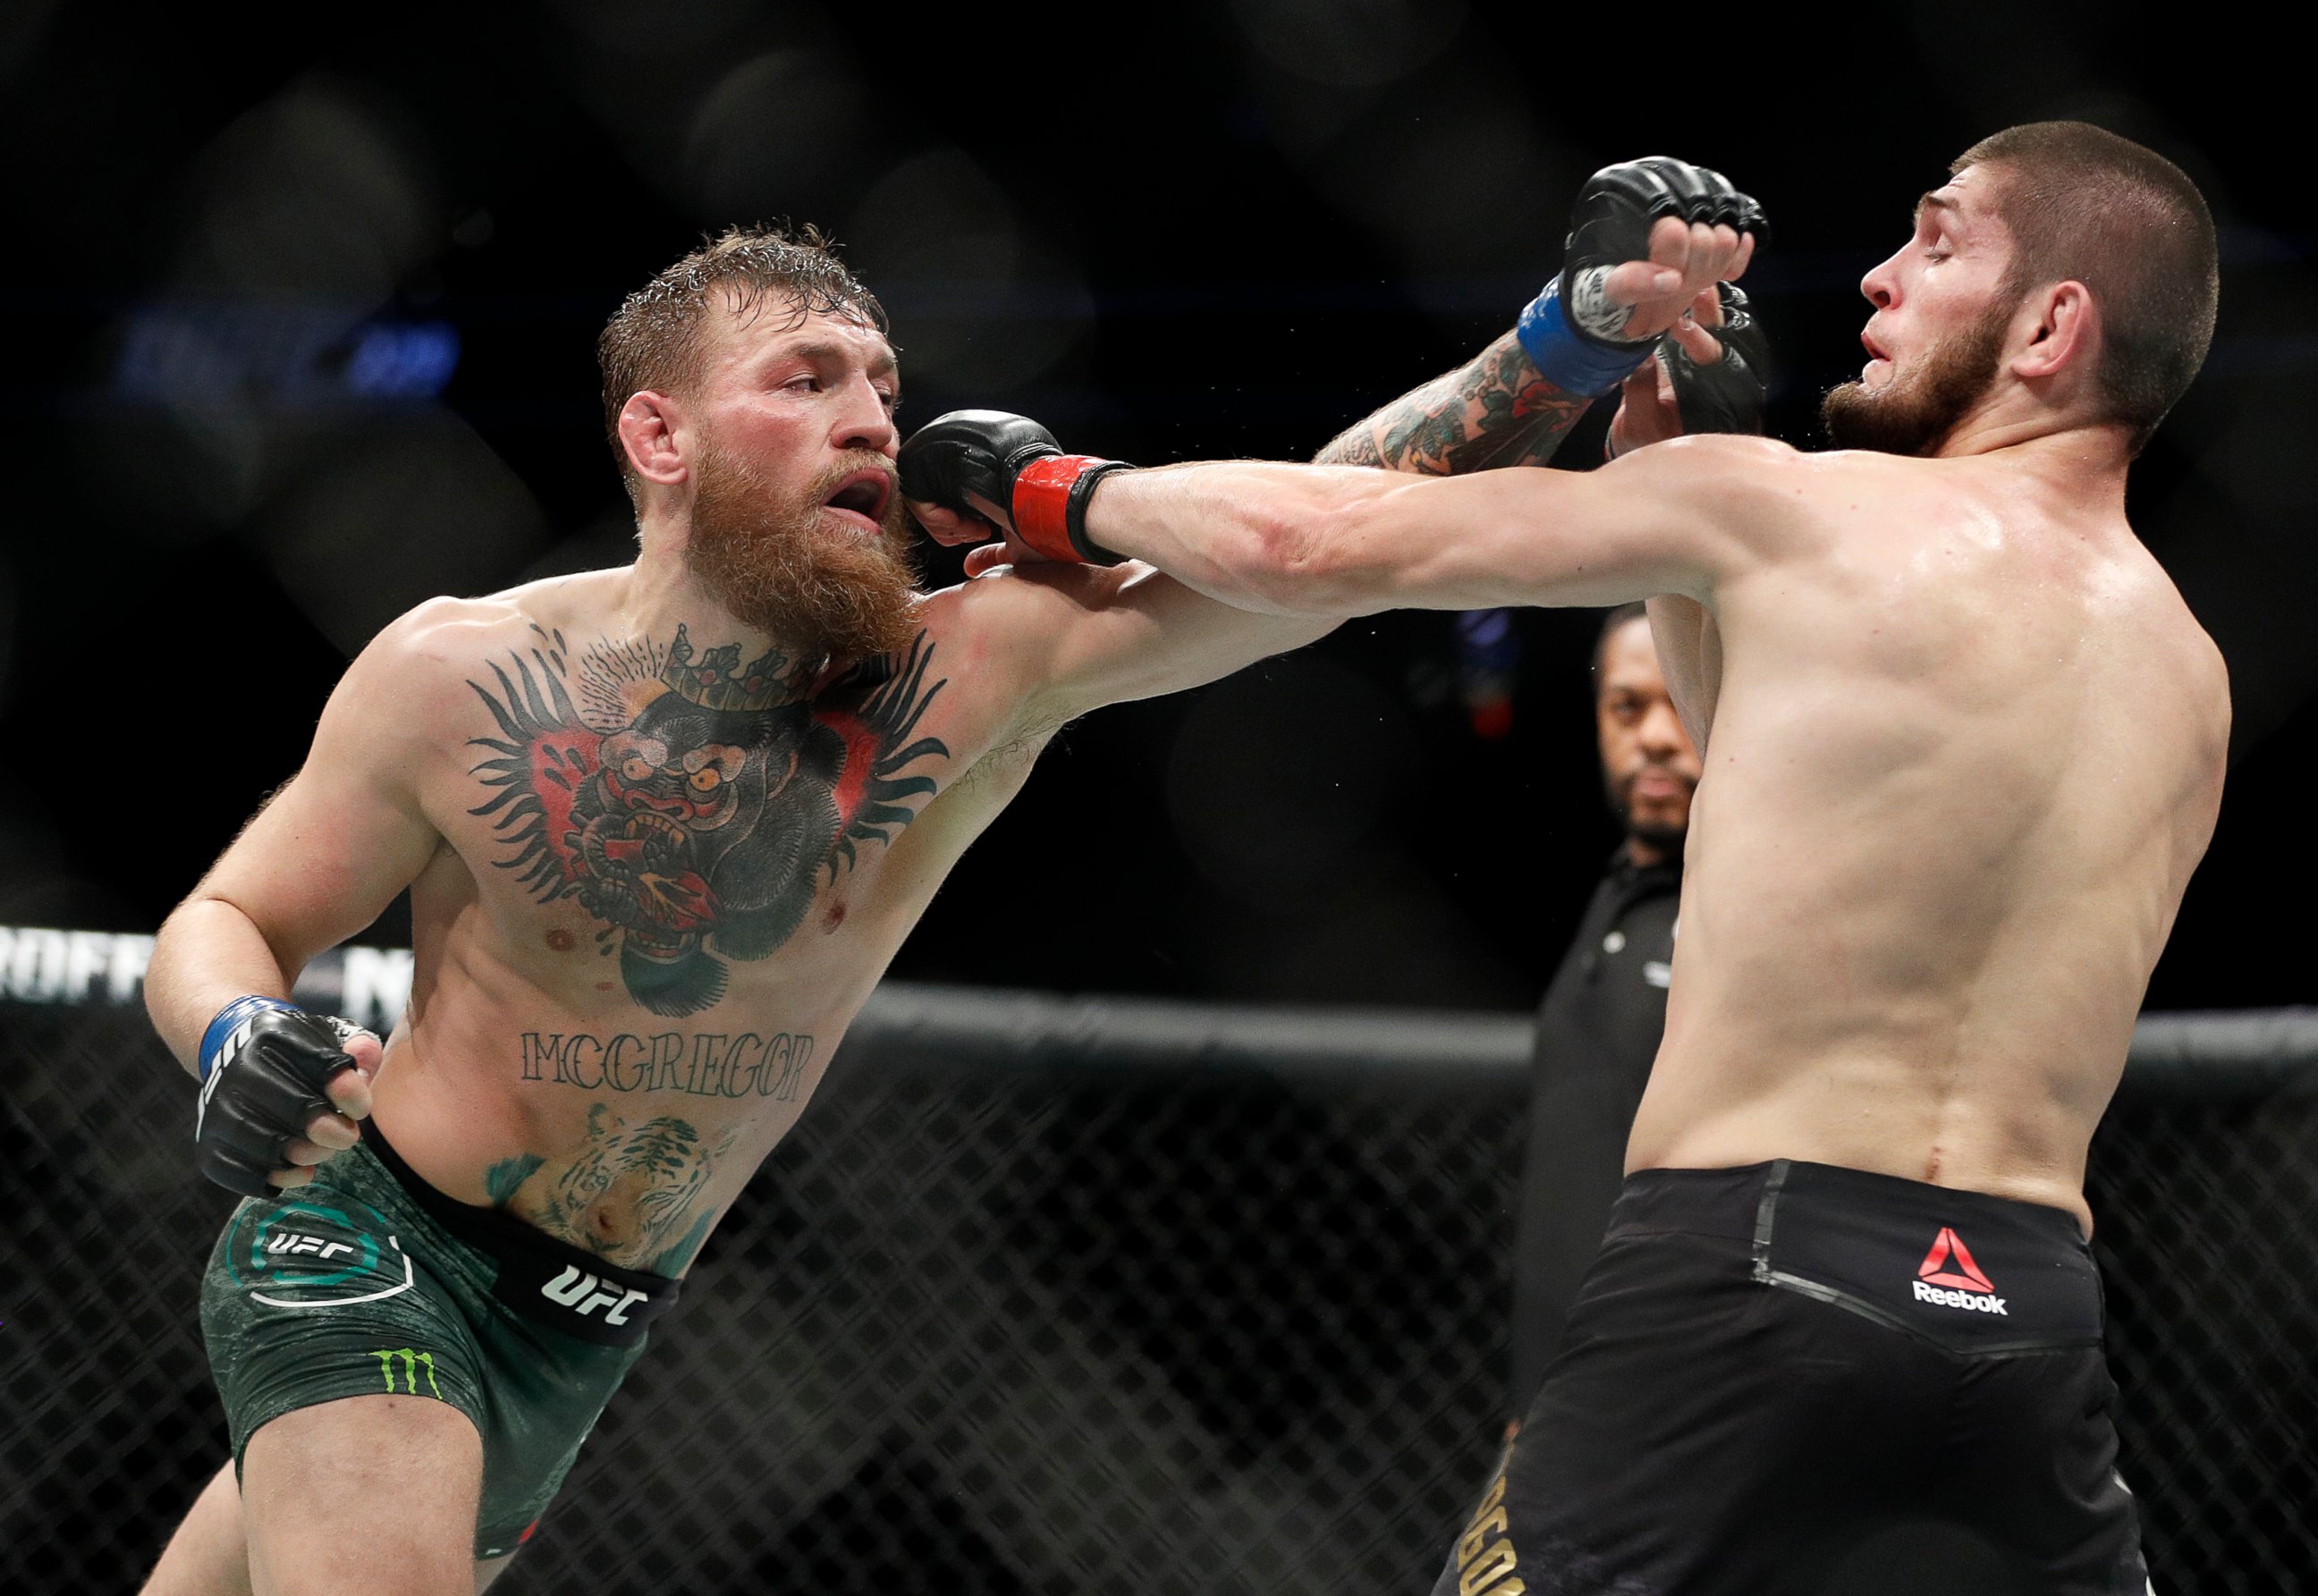 PHOTO: Conor McGregor, left, and Khabib Nurmagomedov throw punches during a lightweight title mixed martial arts bout at UFC 229 in Las Vegas, Saturday, Oct. 6, 2018.